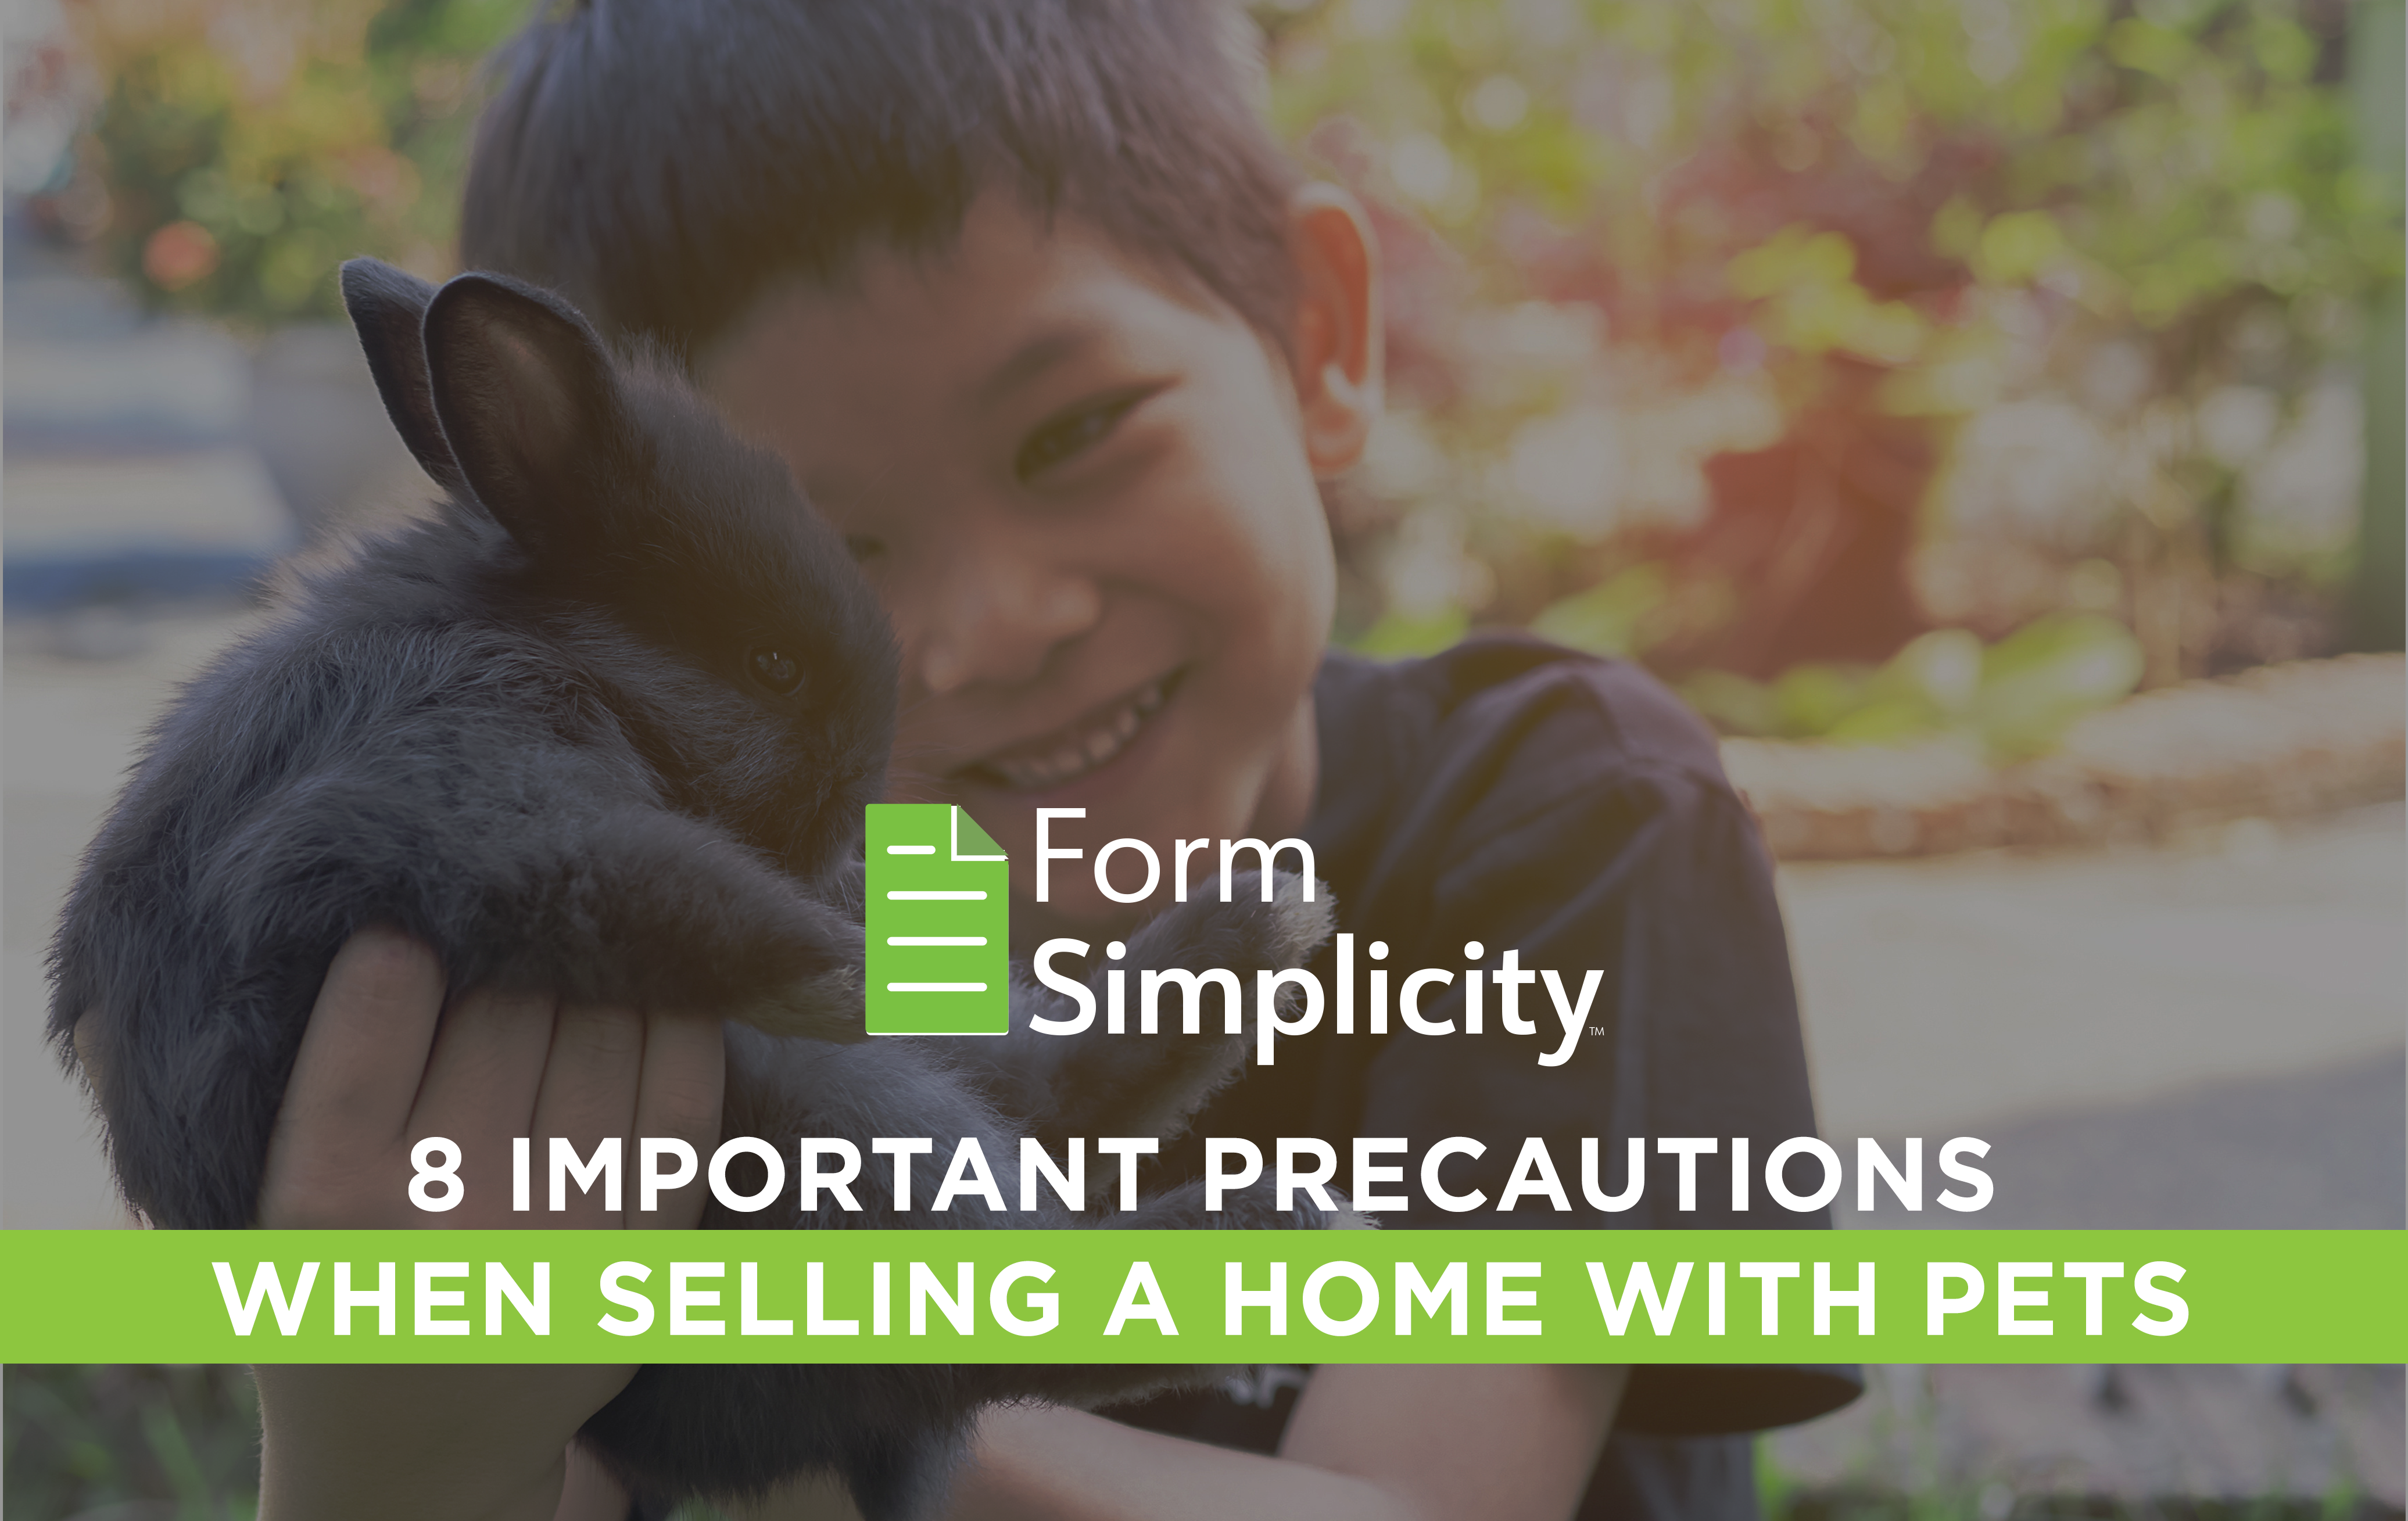 Important Precautions When Selling a Home With Pets, Cats, Dogs, Birds, Snakes, or Whatever Animal Resides Within the Home Image